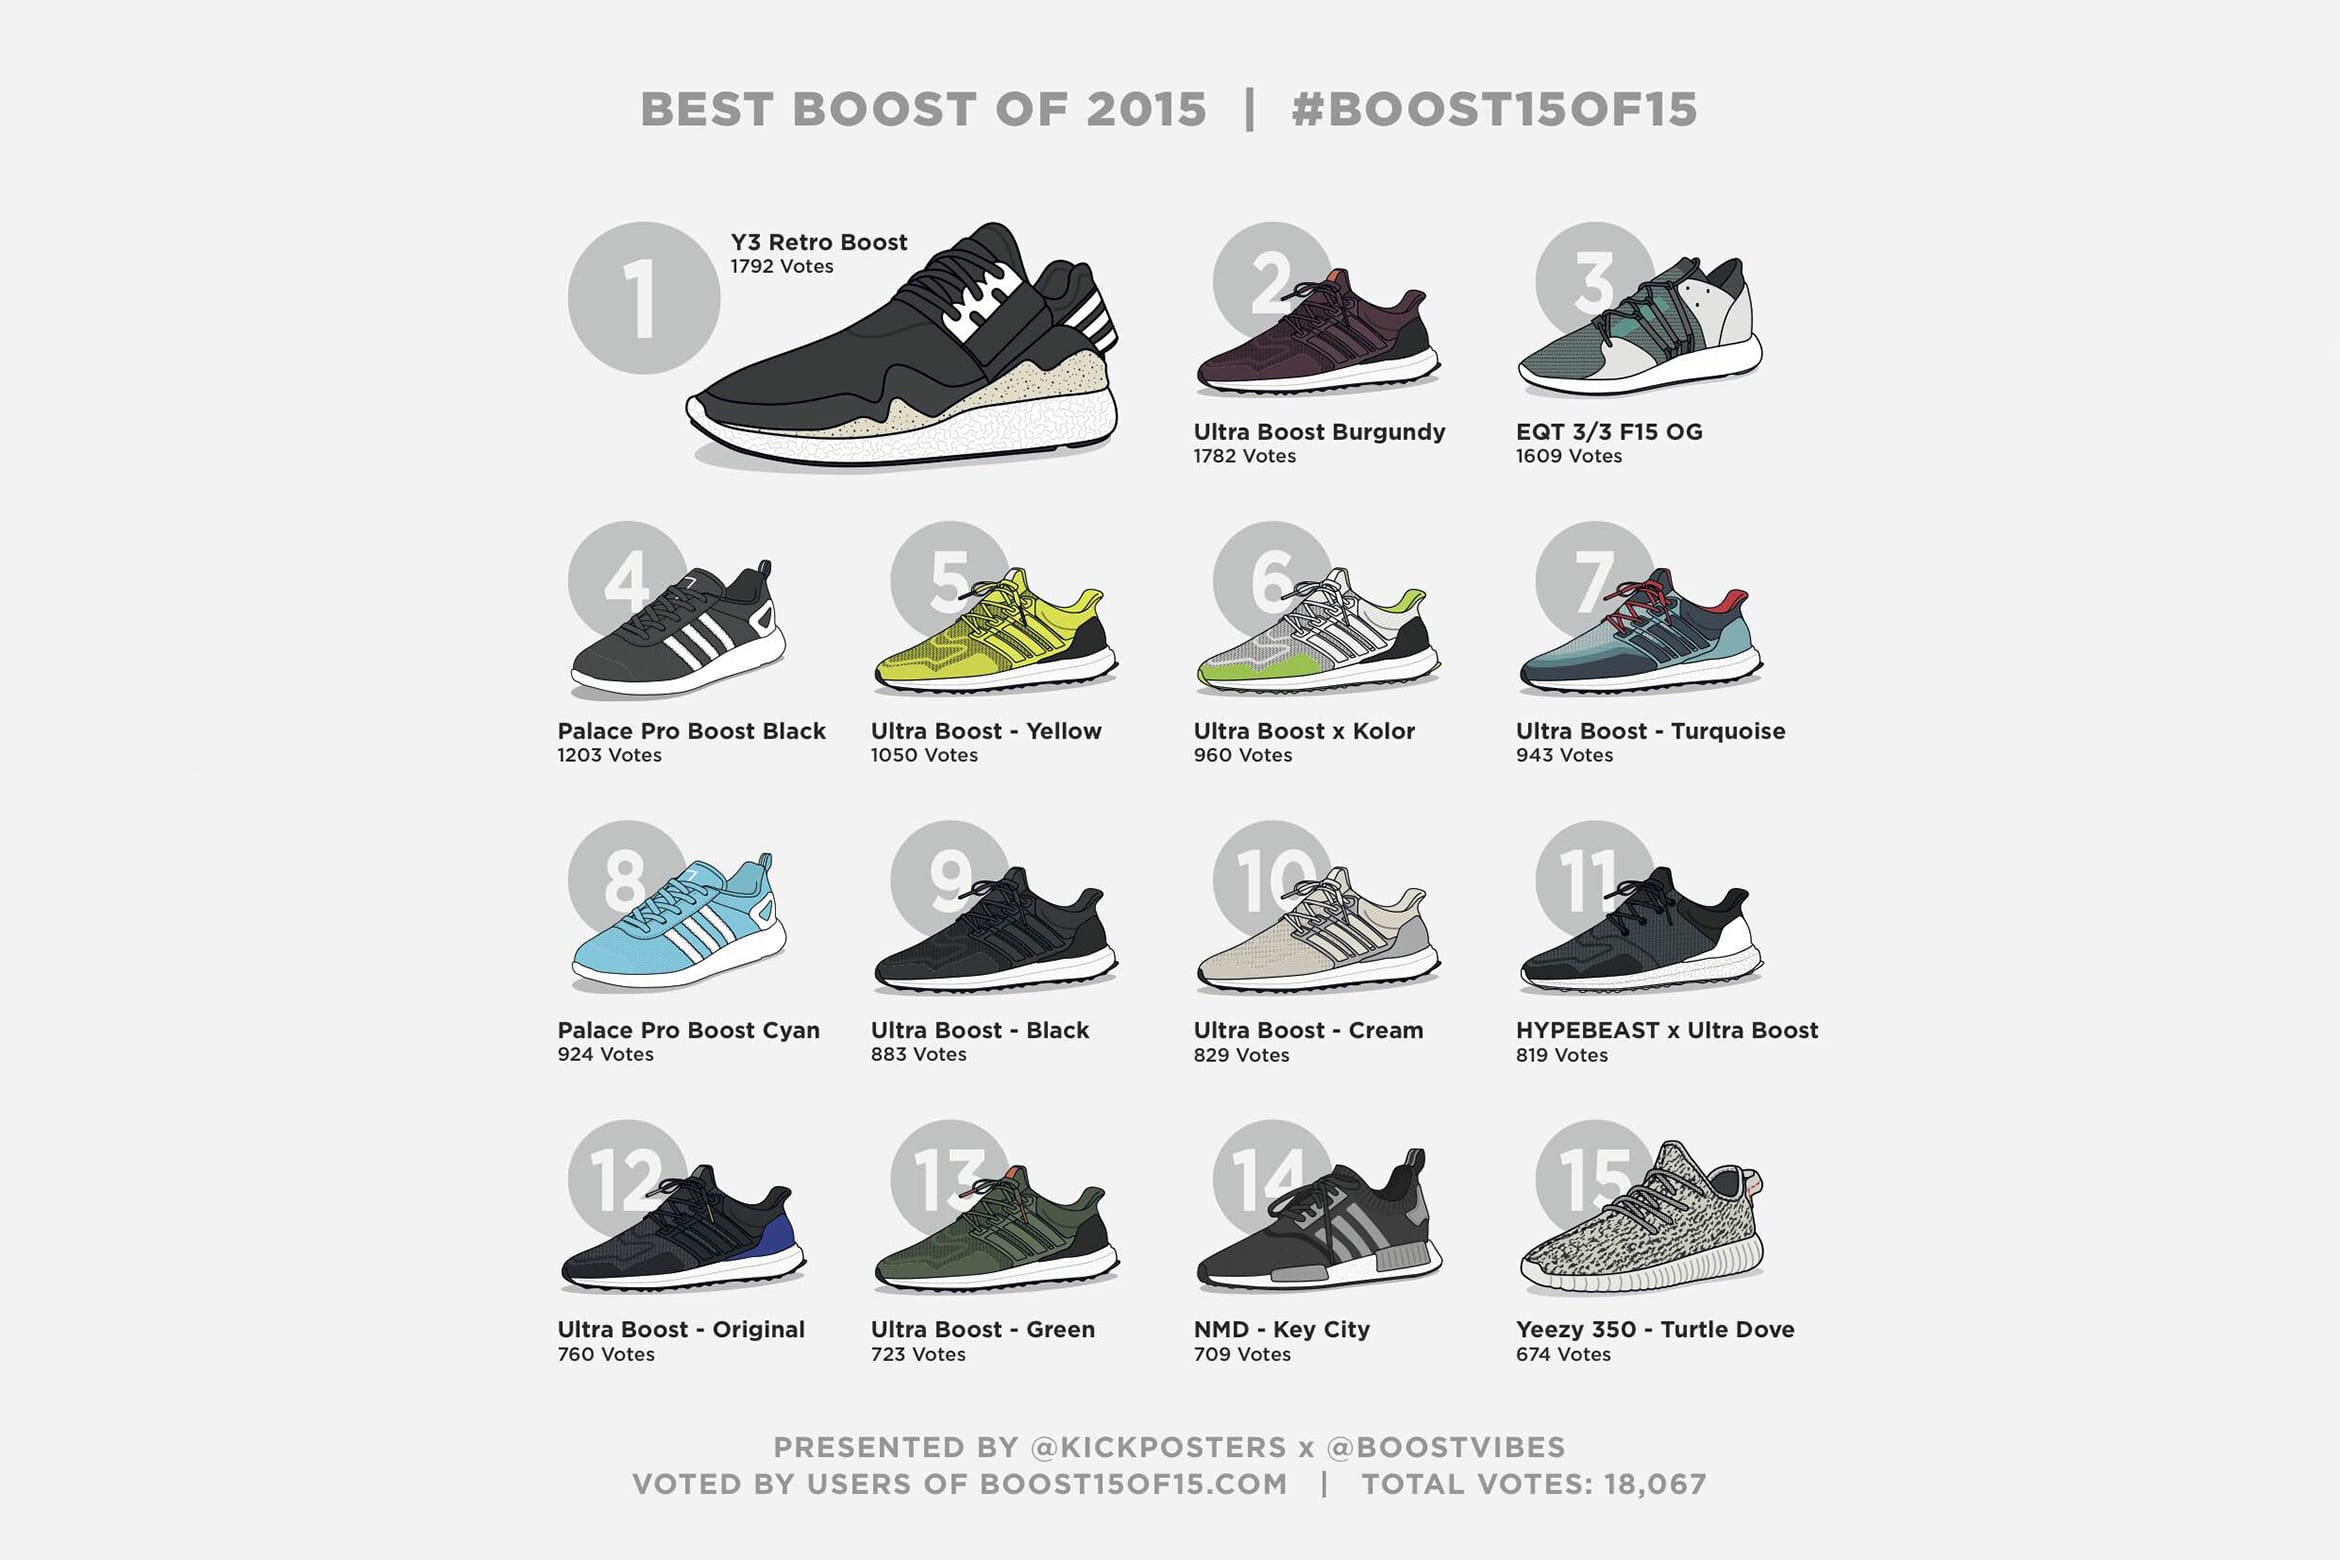 The Most Hyped Boost Sneakers of 2015 